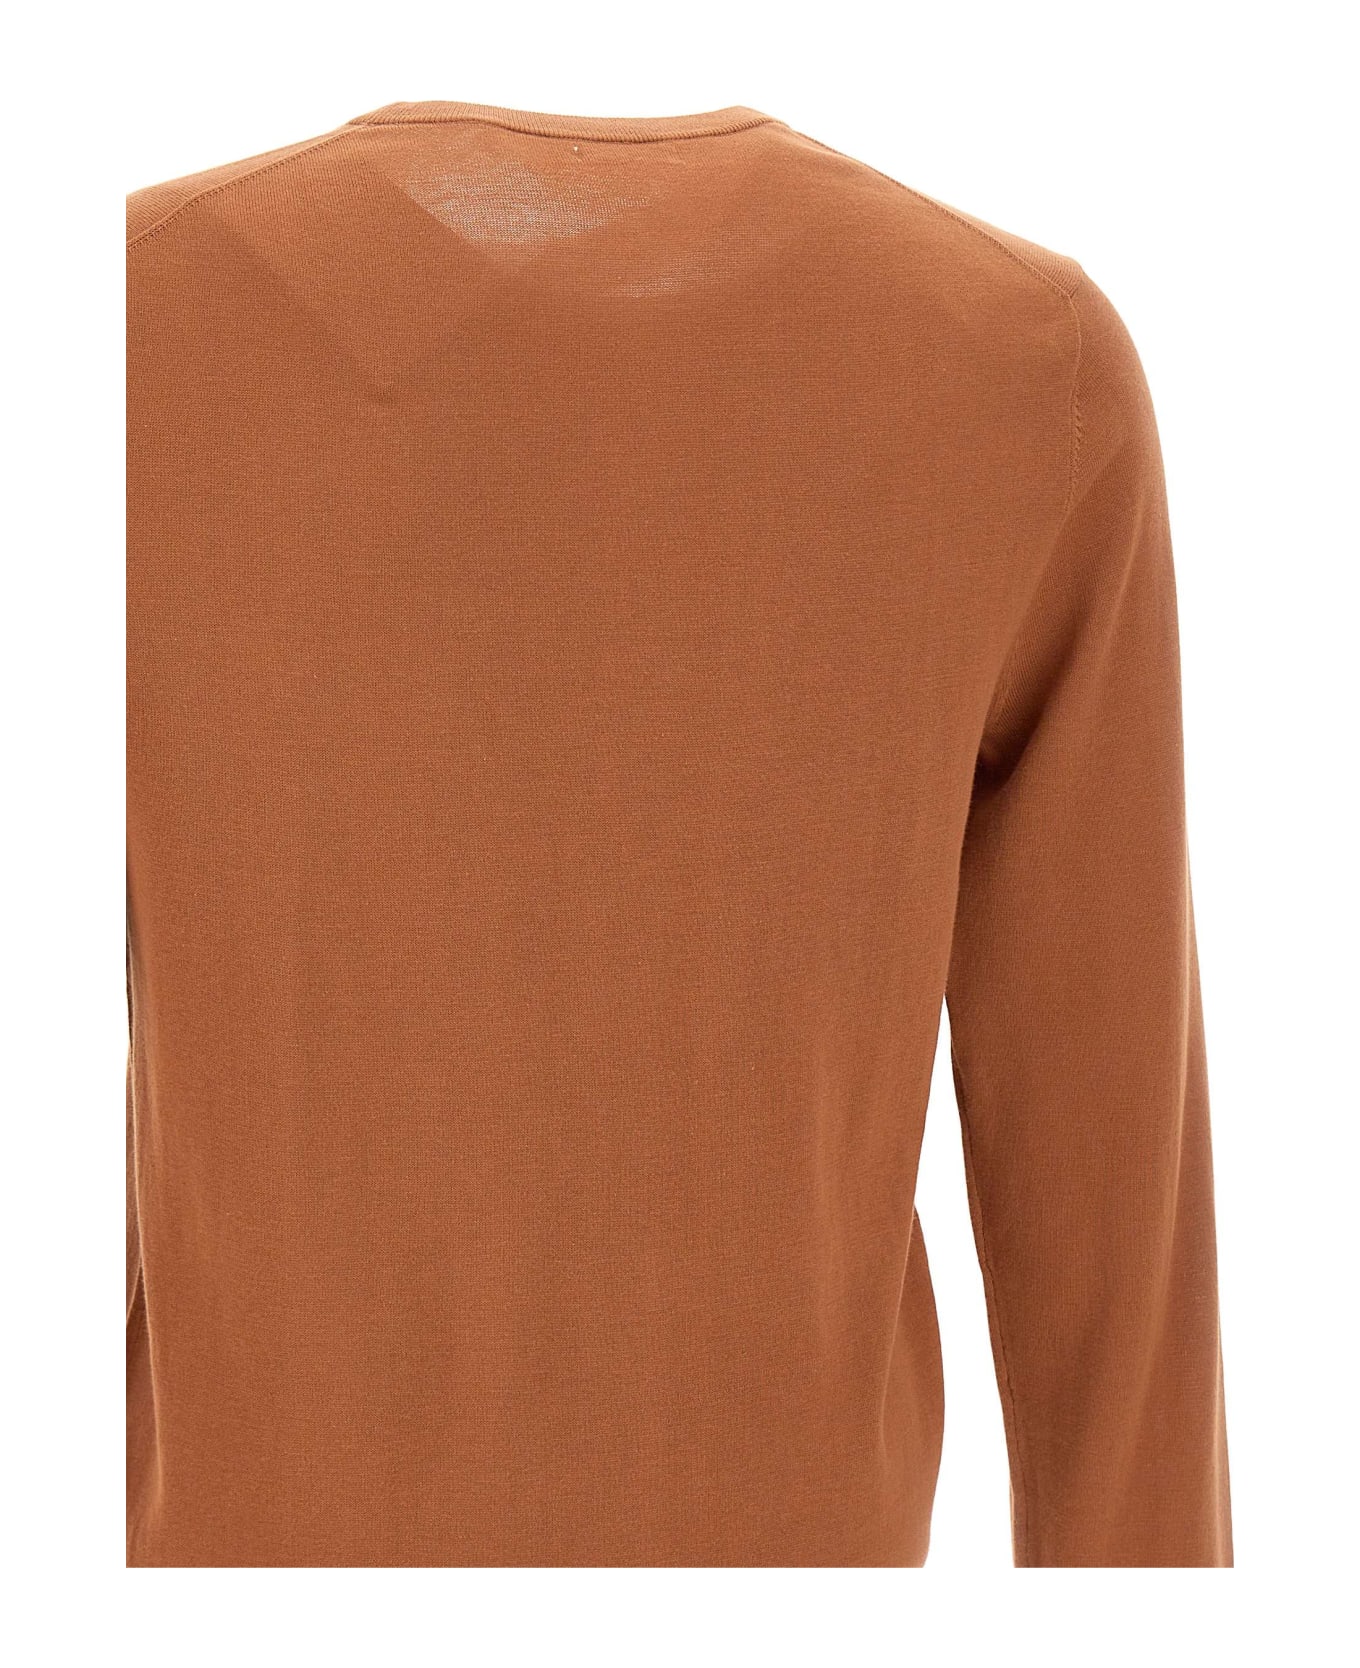 Sun 68 "solid" Cotton Sweater - BROWN